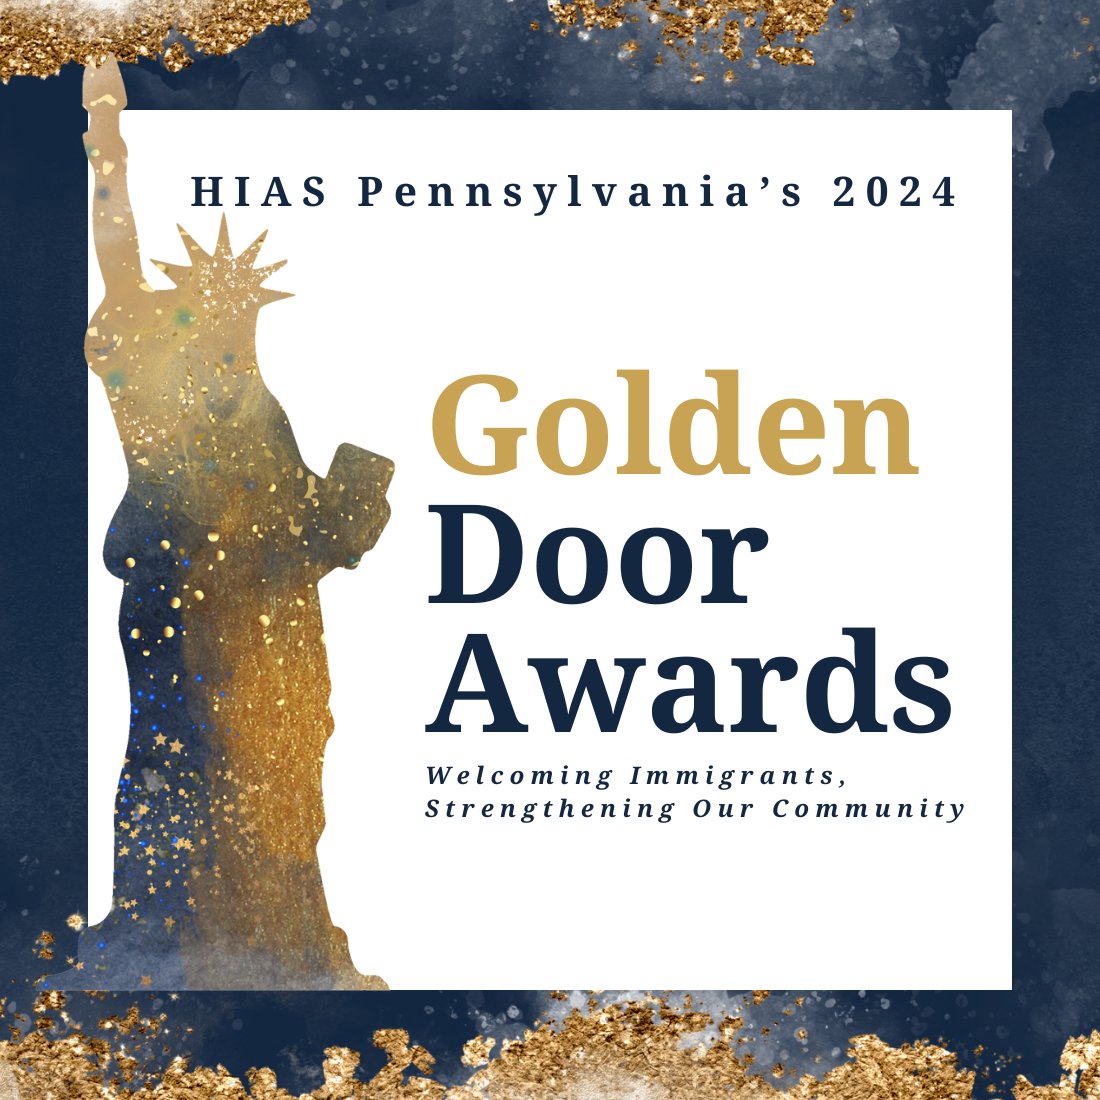 Registration is now open for our 2024 Golden Door Awards! The event will be held on Thursday, April 18th. Your support helps us serve low-income immigrants from all over the world as they build new lives in our community. Learn more & register here: hiaspa.org/event/2024gold…